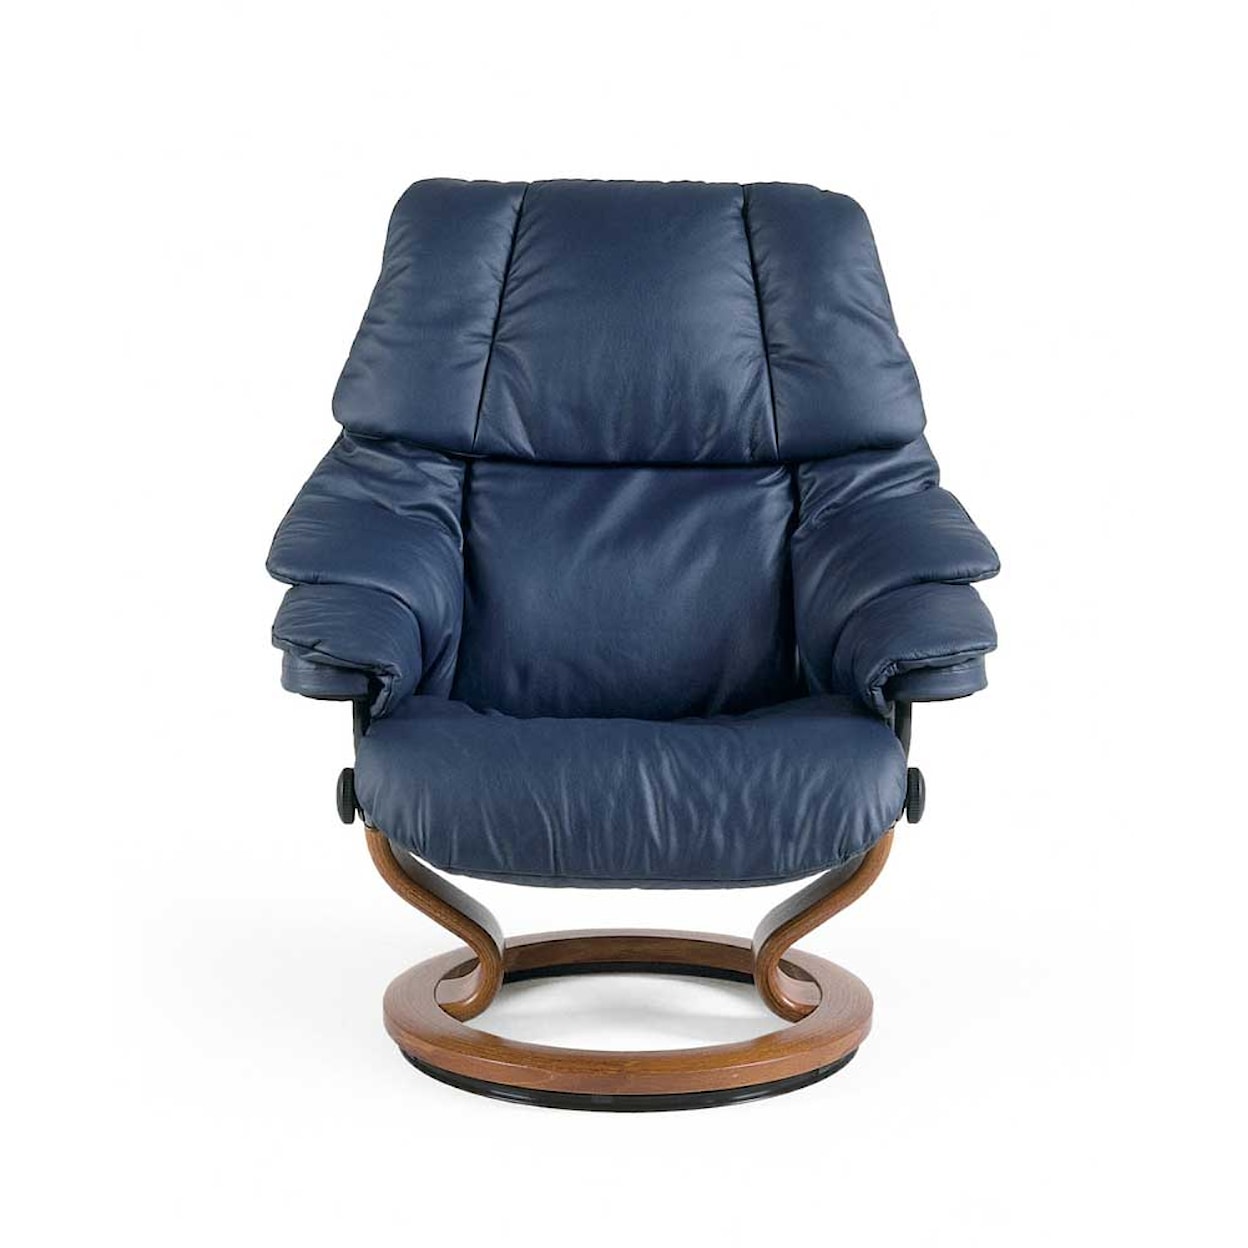 Stressless by Ekornes Reno Medium Chair & Ottoman with Classic Base